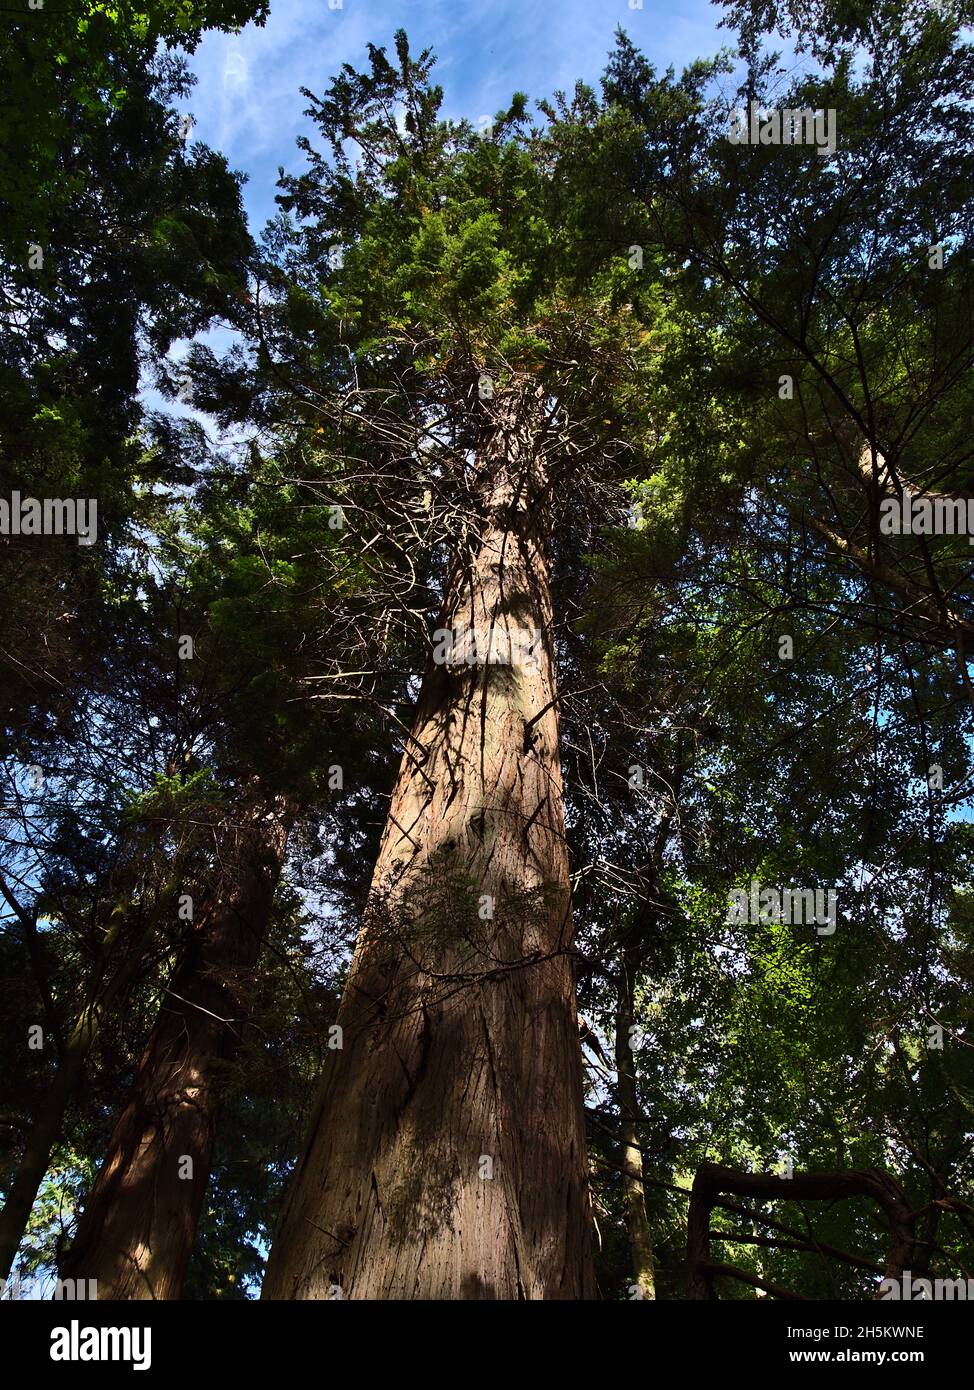 Beautiful low angle view of majestic western red cedar (Thuja plicata) in an old forest in Lighthouse Park, West Vancouver, British Columbia, Canada. Stock Photo